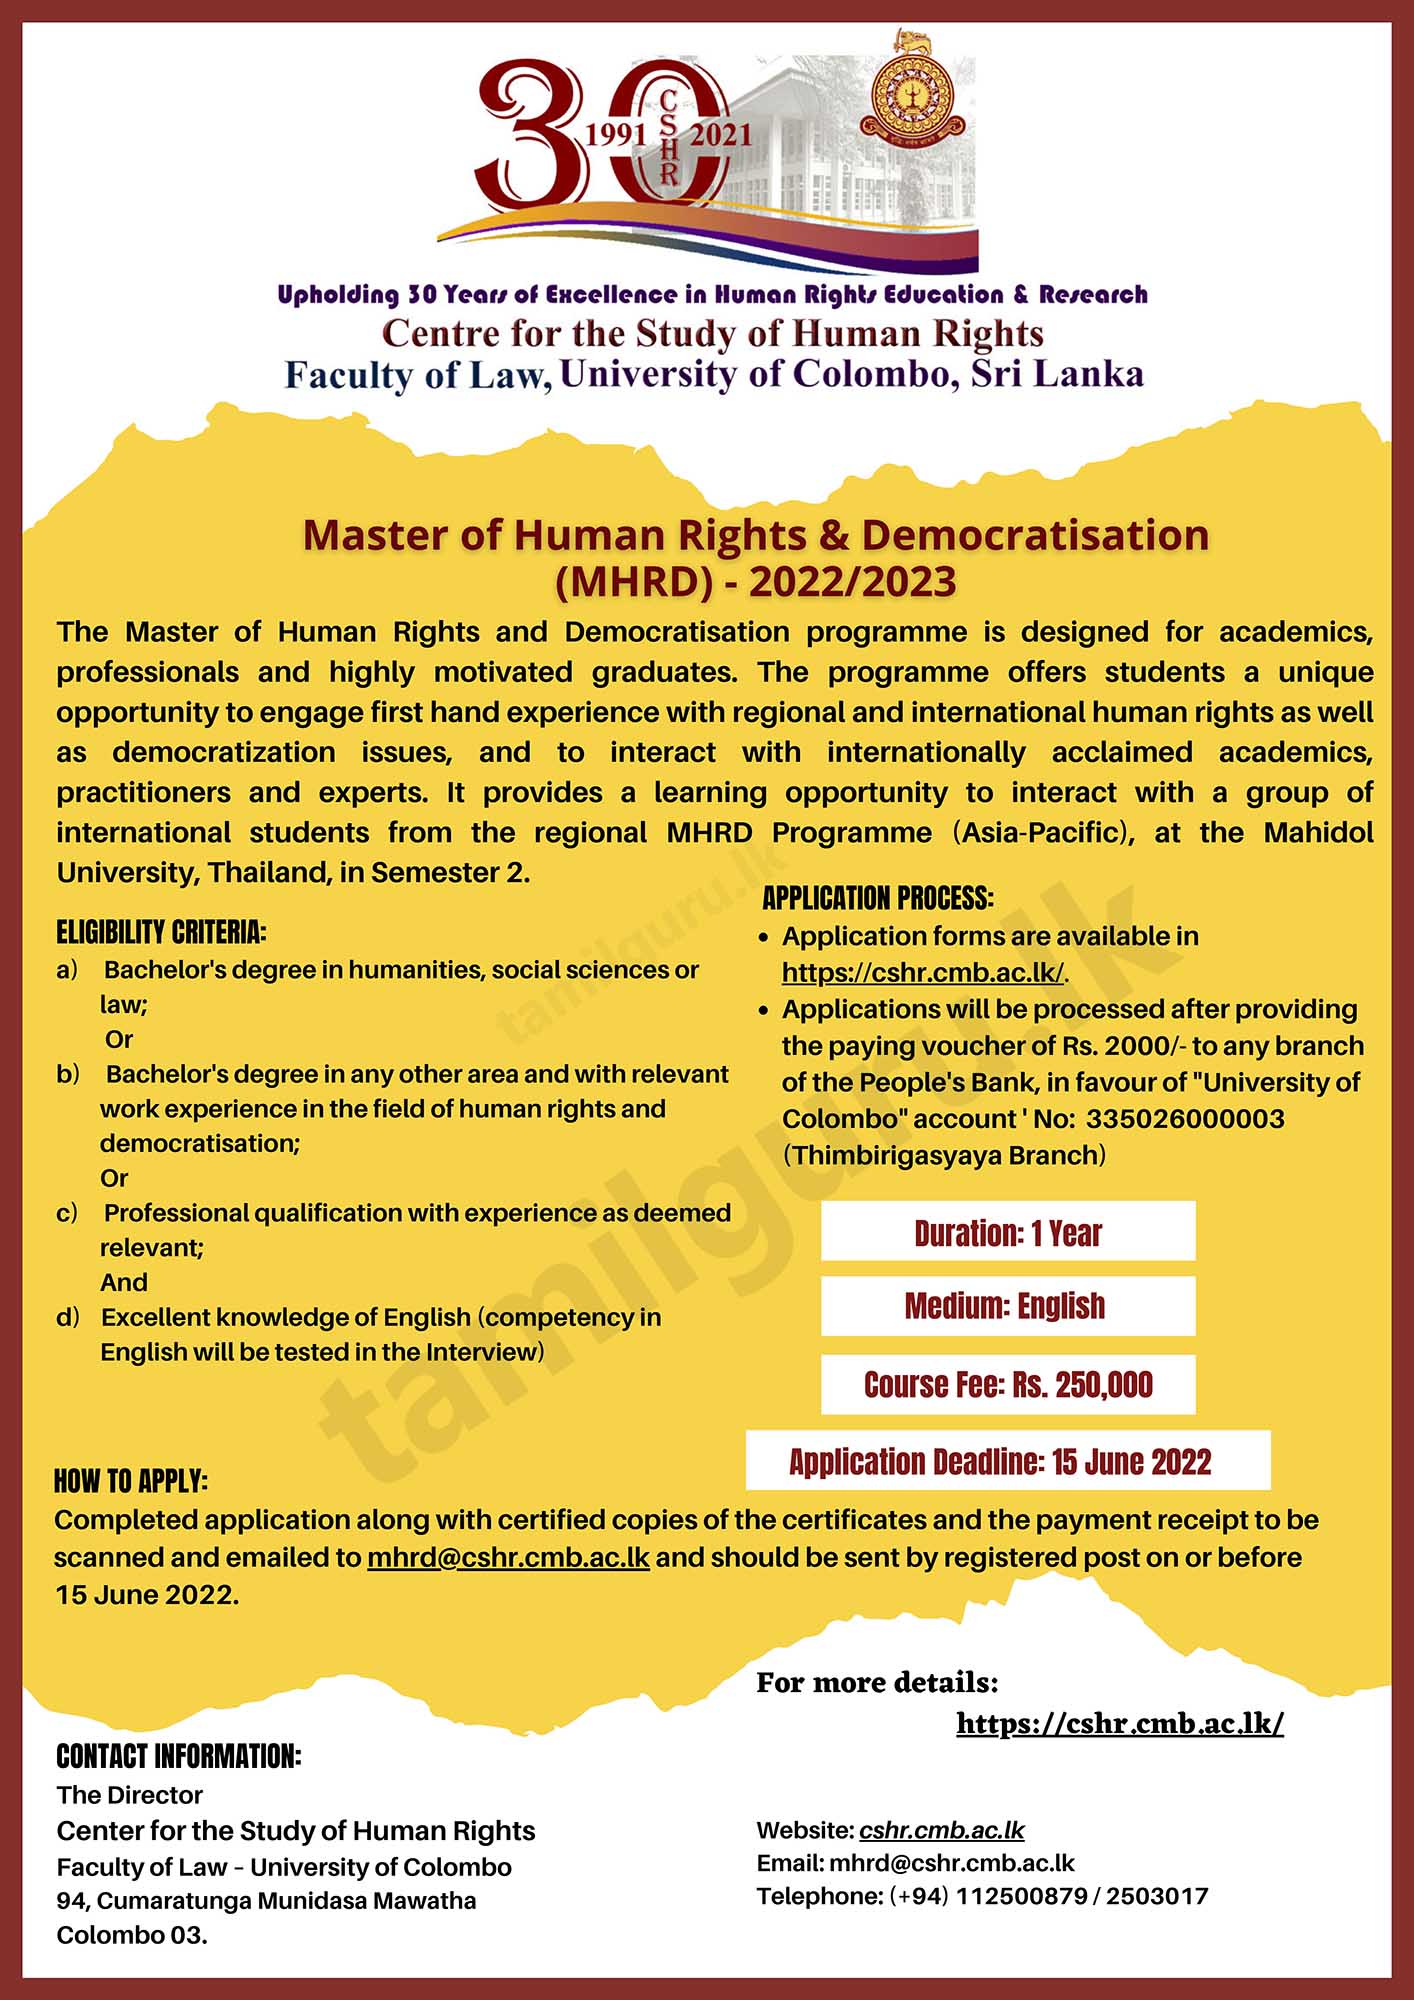 Master of Human Rights and Democratisation (MHRD) 2022/2023 - University of Colombo